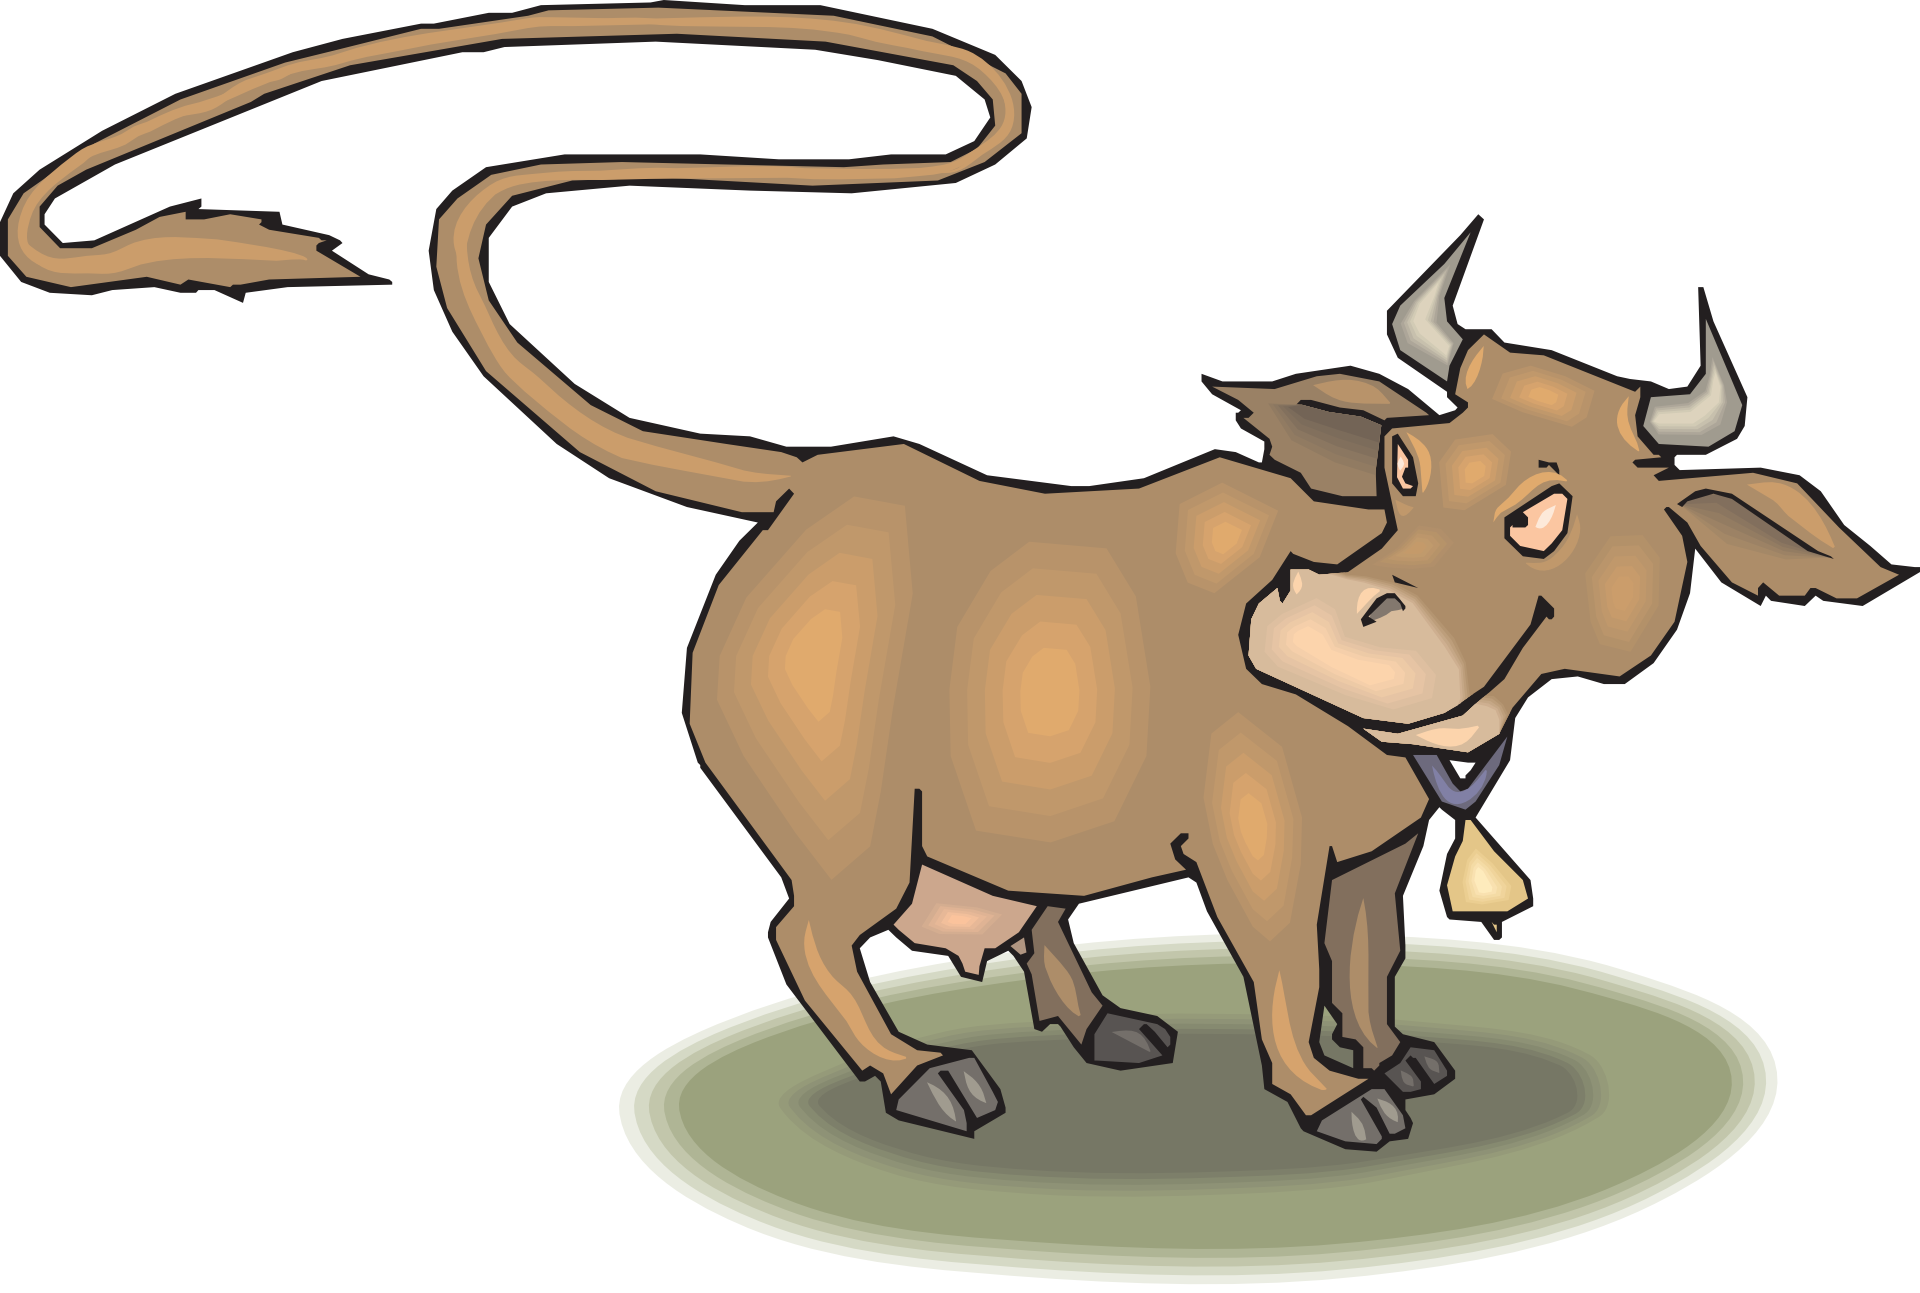 Funny Cow drawing free image download